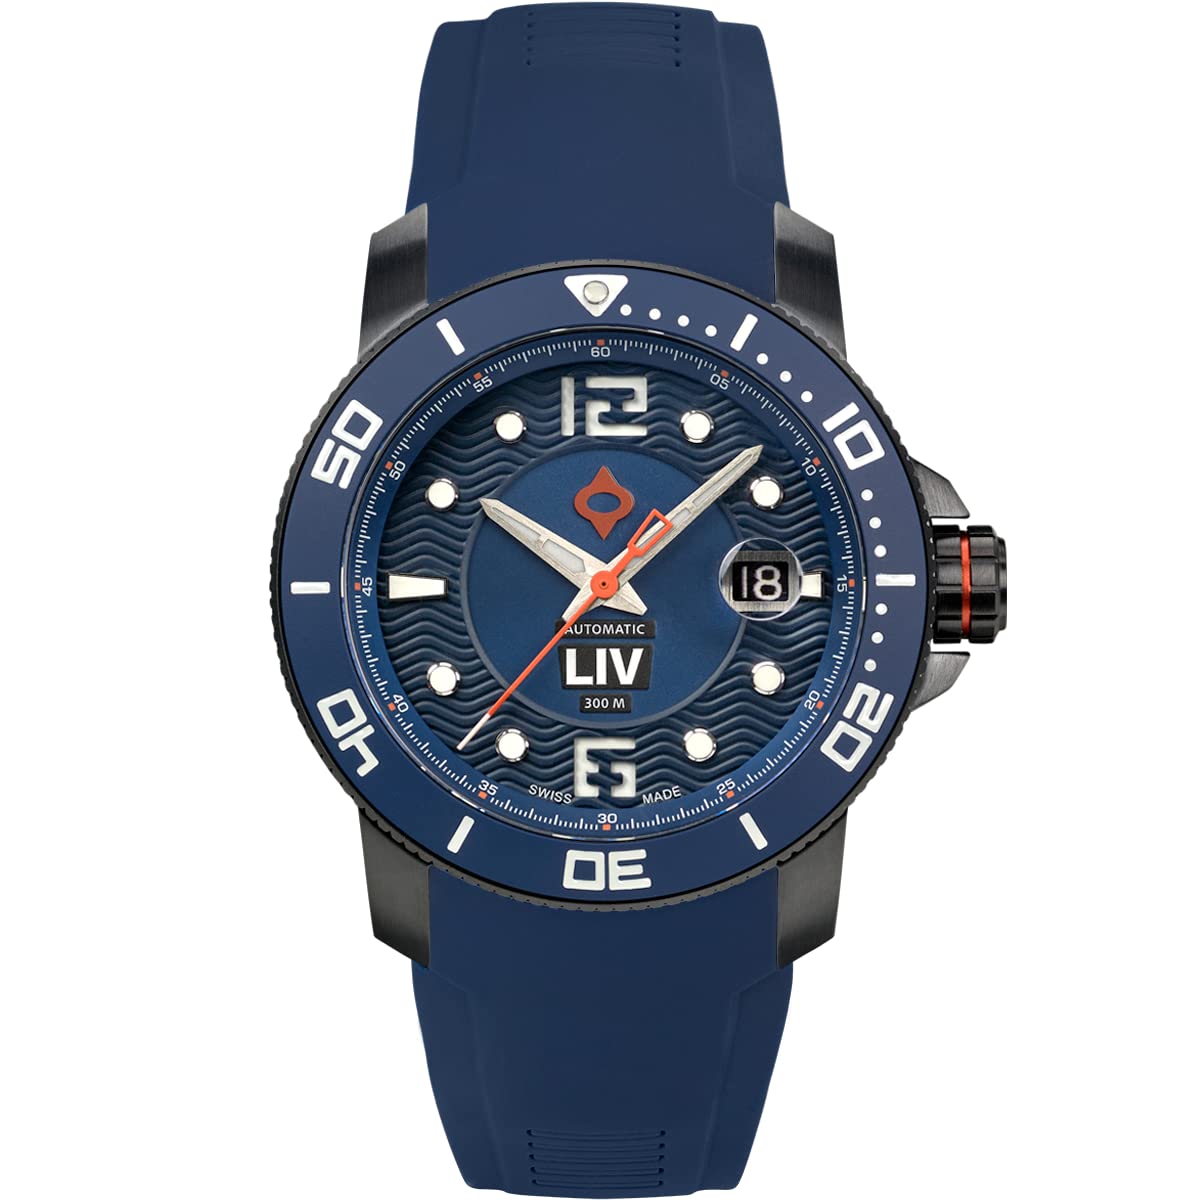 LIV GX-Diver's 44MM Swiss Automatic -1000 Feet Water Resistant -Surgical Grade 316L Stainless Steel - Unidirectional Ceramic Bezel - BGW9 Luminova - Scratch Resistant Sapphire Crystal - Dive Watches for Men